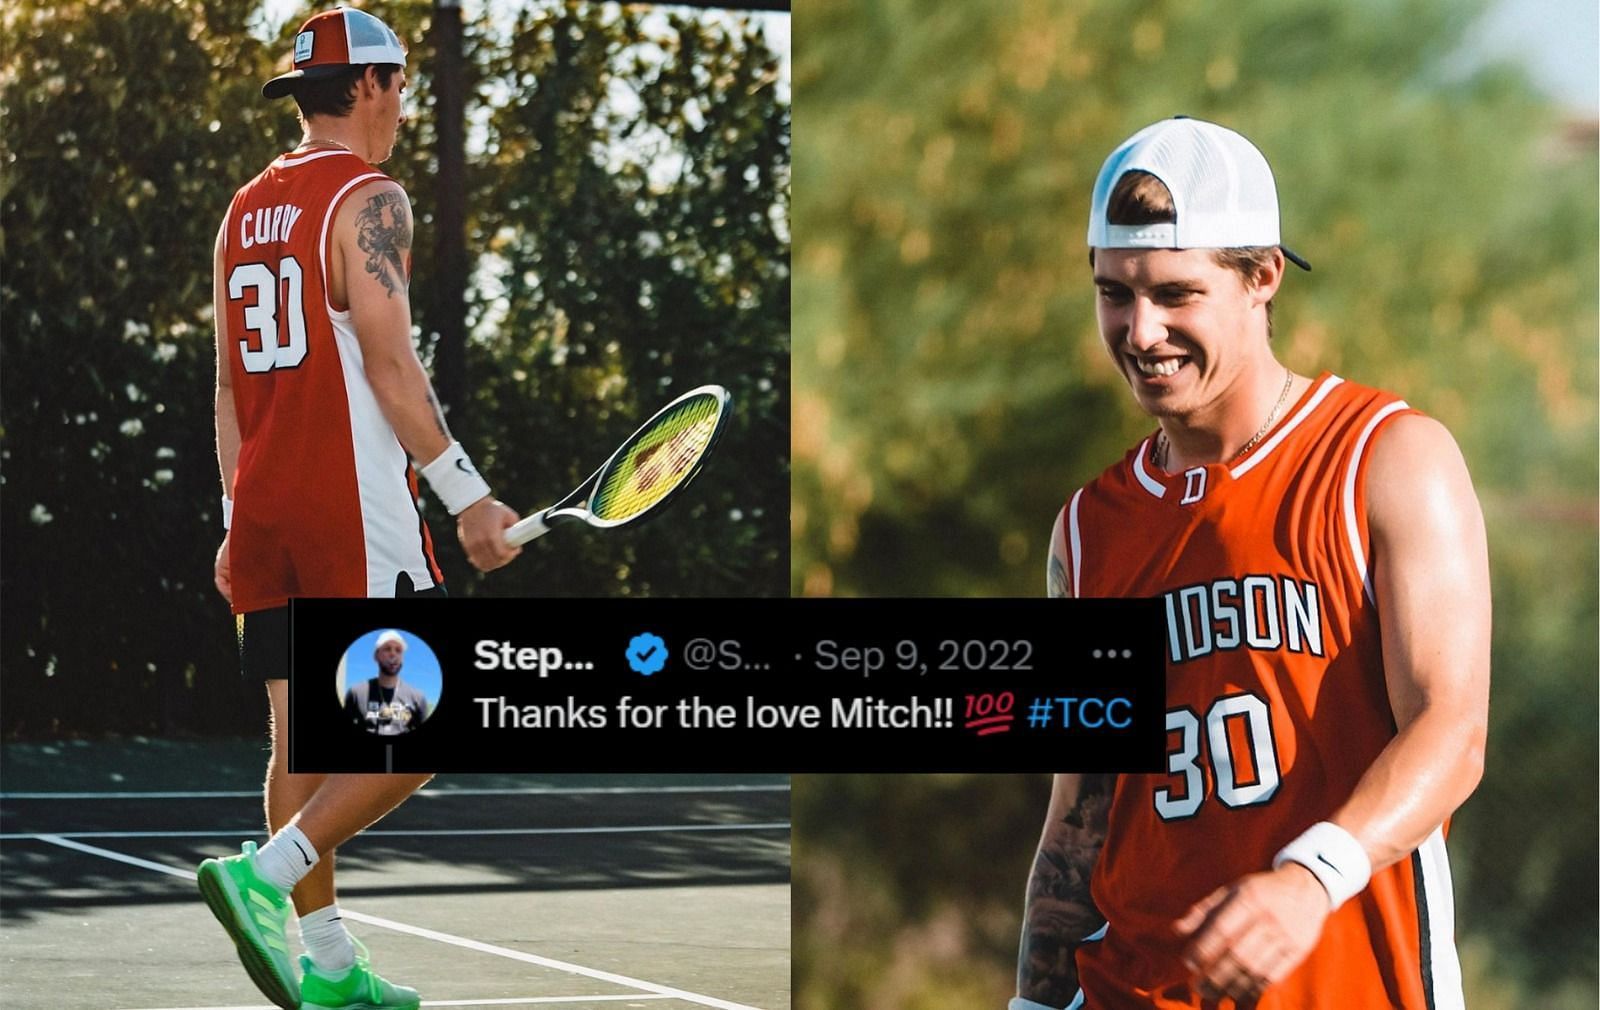 When Mitch Marner rocked Steph Curry Davidson throwback jersey during a tennis session